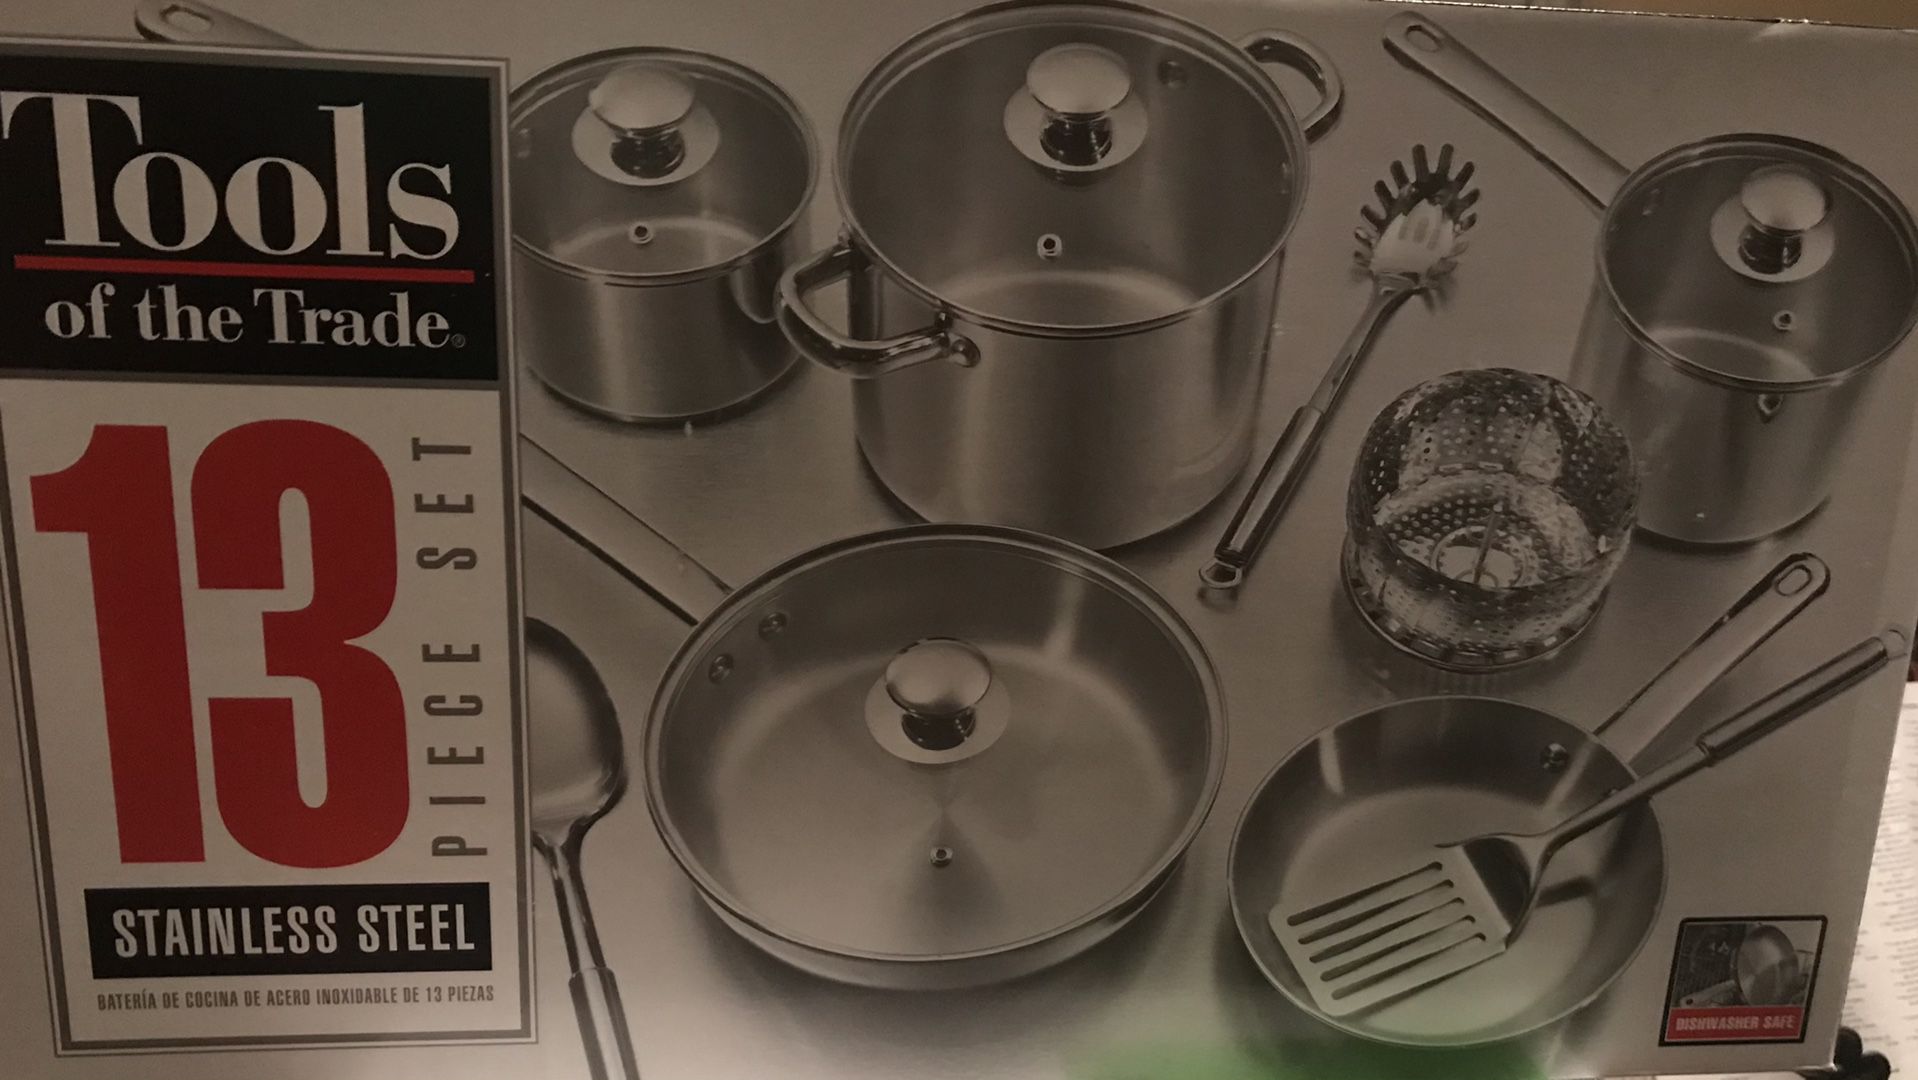 Stainless Steel Pot & Pan Set From Macy’s 🎁